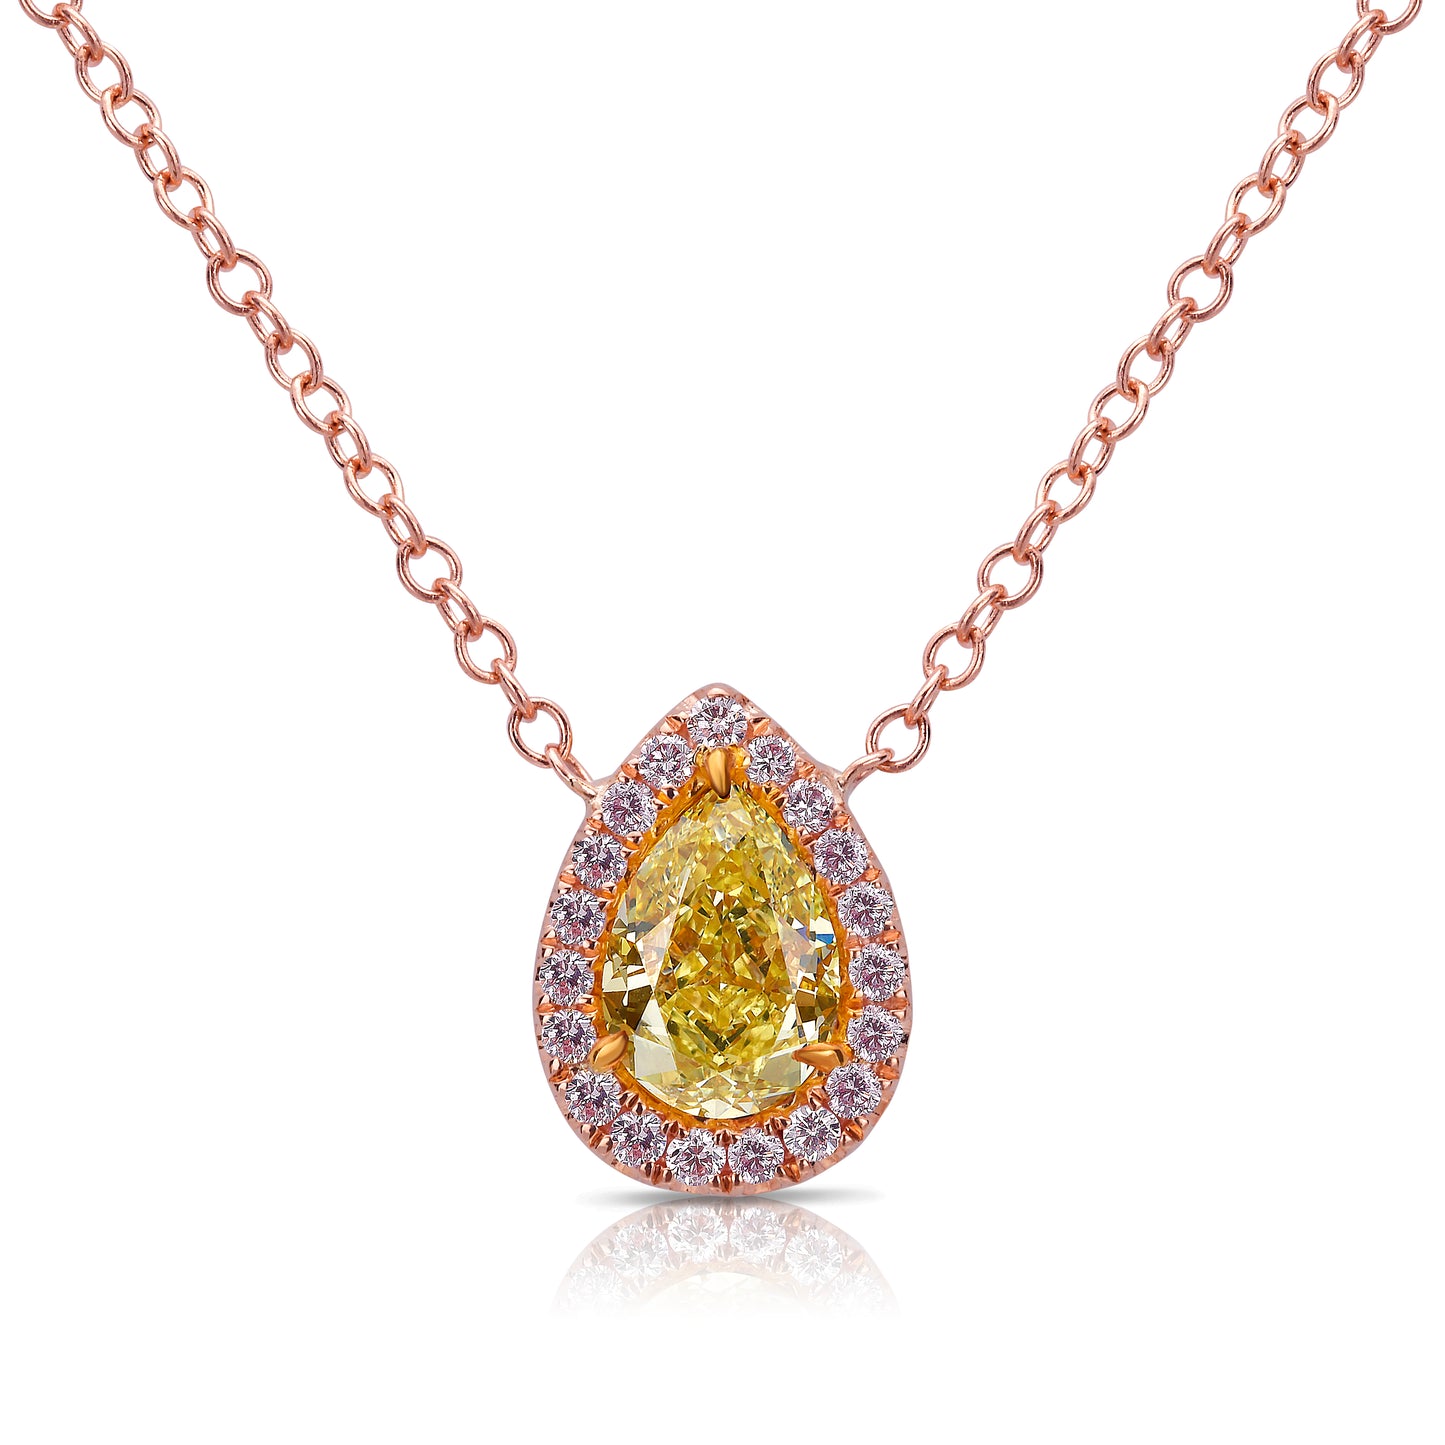 0.96 Carat Center Fancy Intense Yellow Pear Shape Diamond VVS2 Clarity 0.37 Carats Pink and White Surrounding Round Diamonds GIA Certified Diamond Crafted in 18k Rose Gold